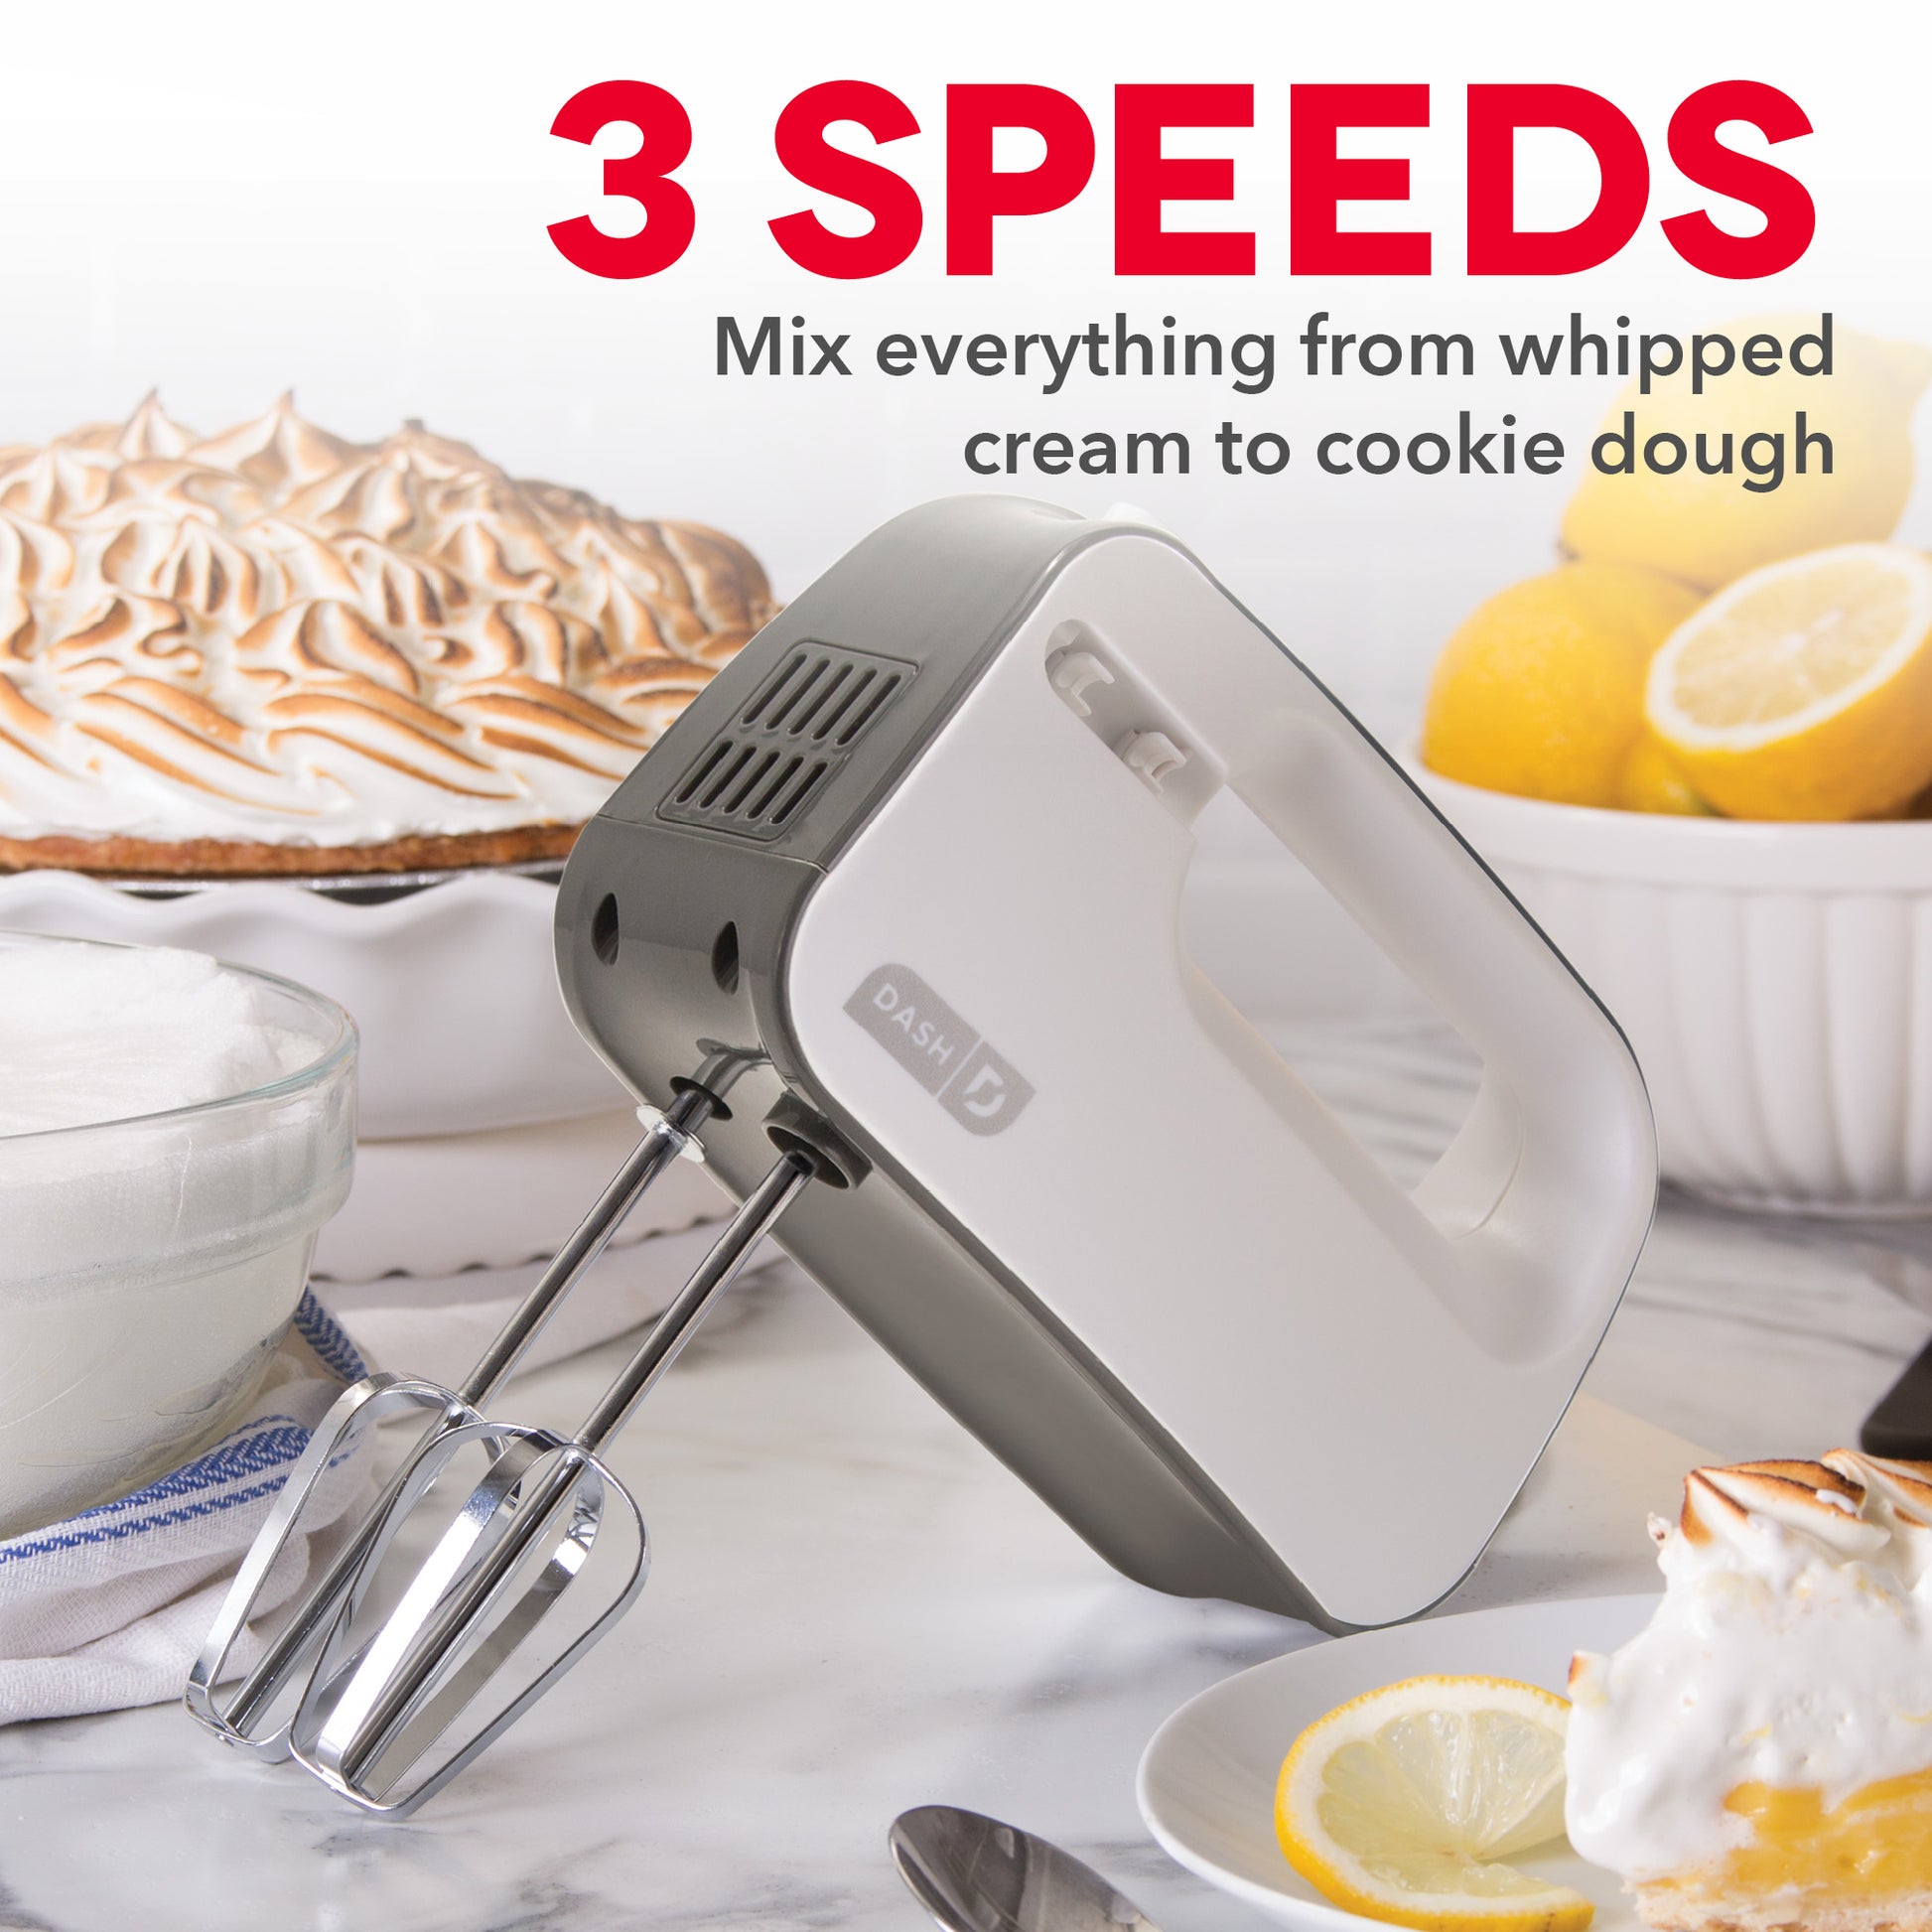  Dash SmartStore™ Deluxe Compact Electric Hand Mixer + Whisk and  Milkshake Attachment for Whipping, Mixing Cookies, Brownies, Cakes, Dough,  Batters, Meringues & More, 3 Speed, 150-Watt – Red: Home & Kitchen